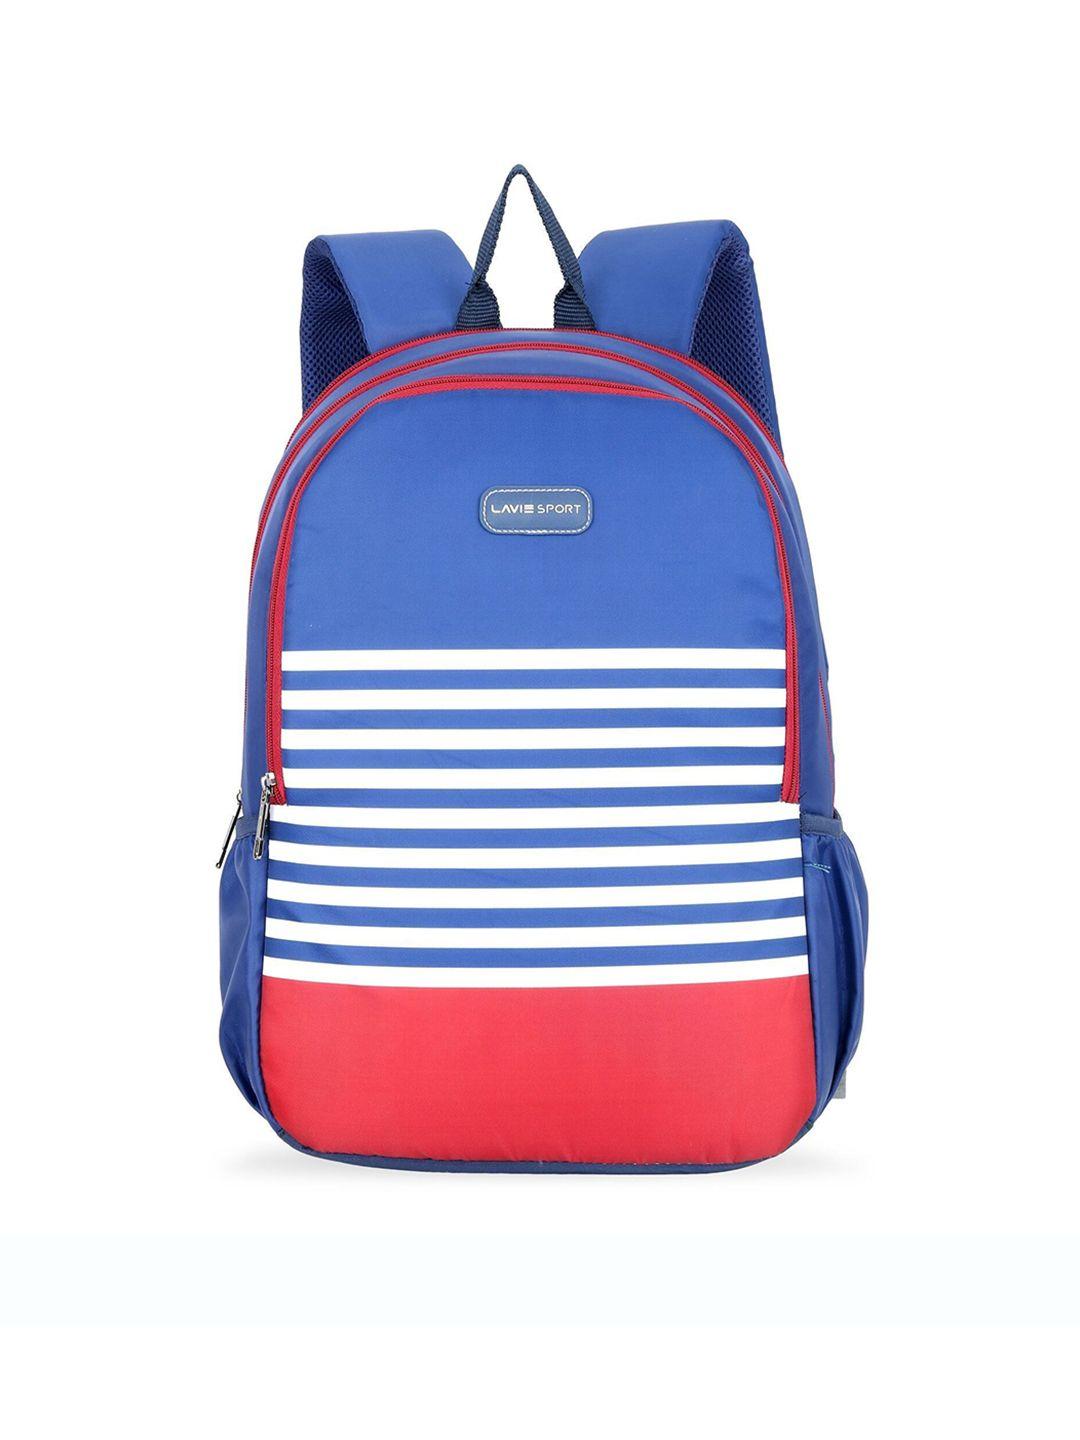 lavie sport unisex navy blue & red graphic backpack